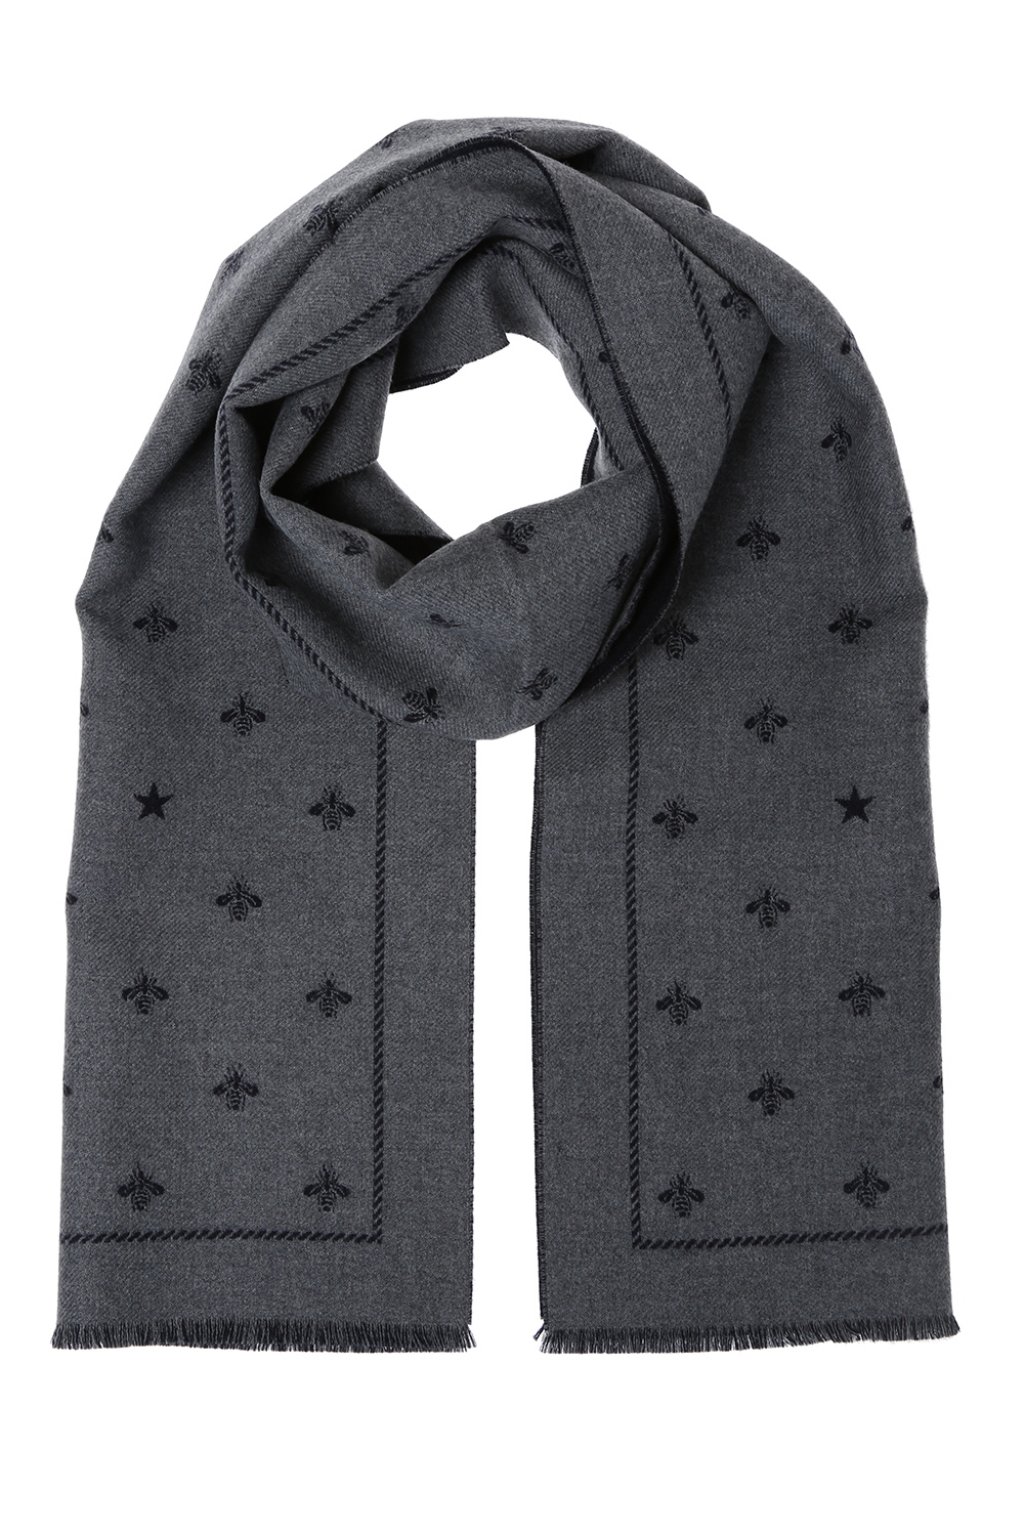 Gucci Patterned scarf | Men's Accessories | Vitkac